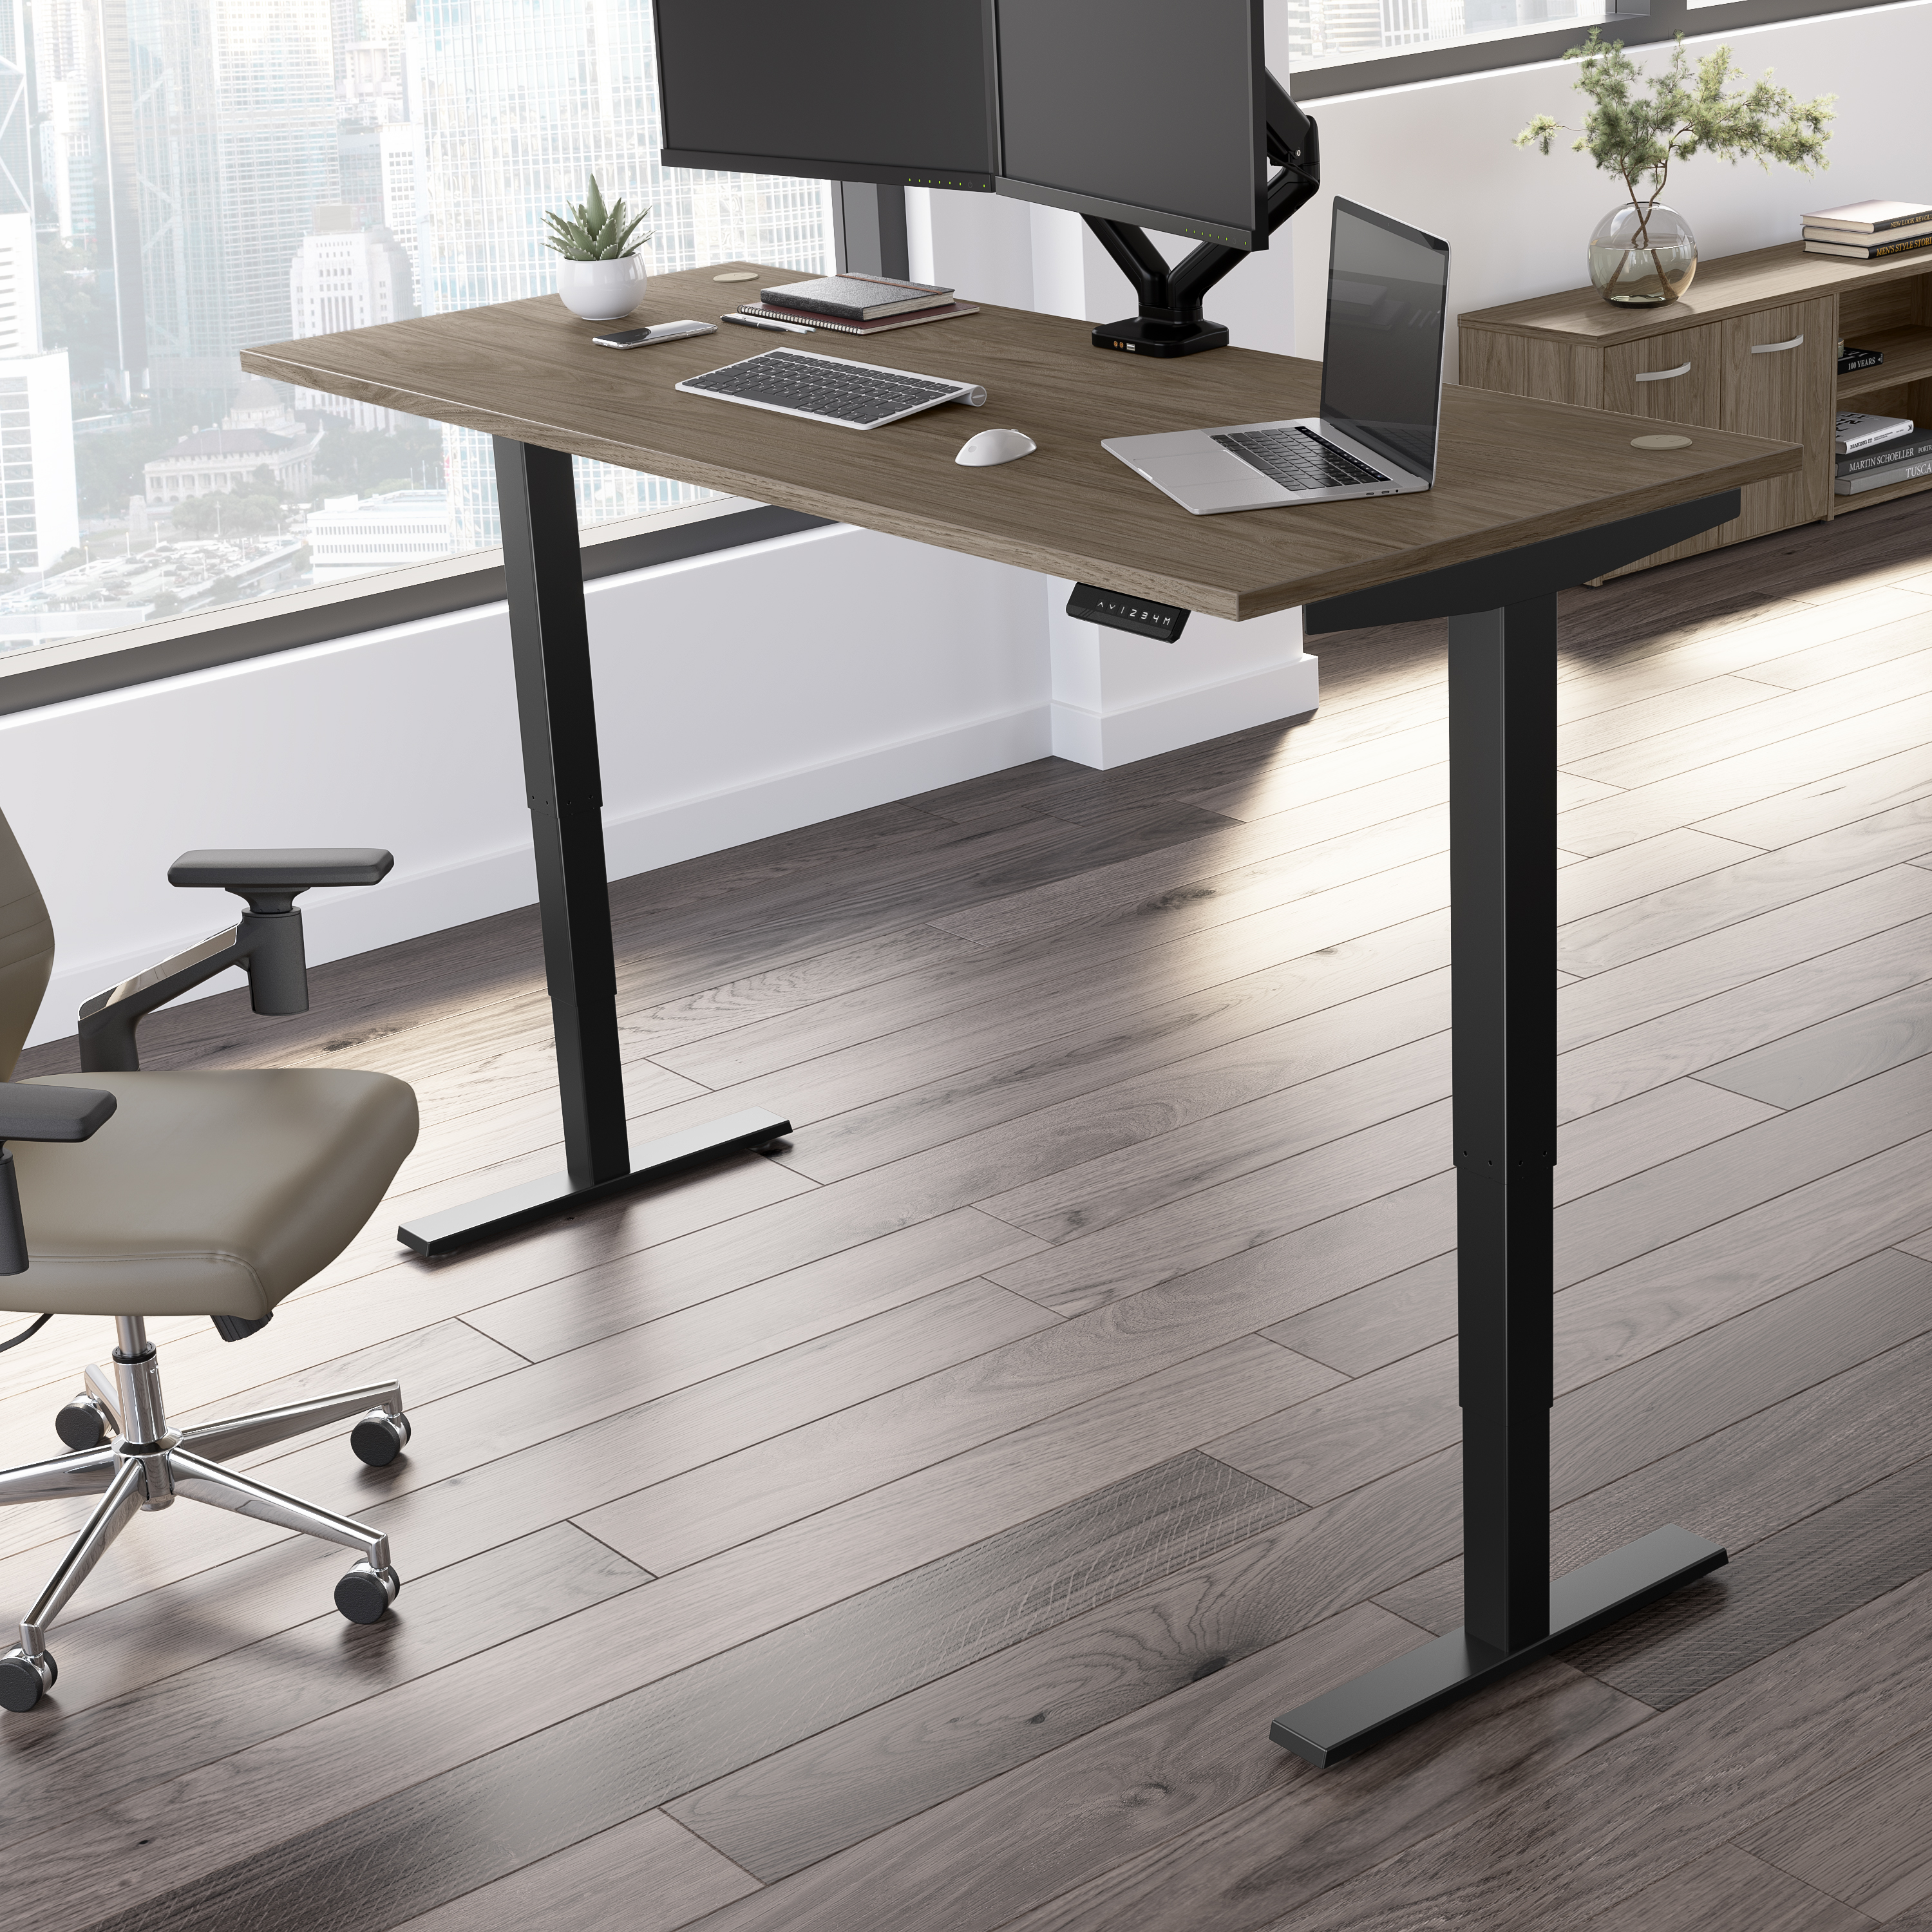 Shop Move 40 Series by Bush Business Furniture 72W x 30D Electric Height Adjustable Standing Desk 01 M4S7230MHBK #color_modern hickory/black powder coat